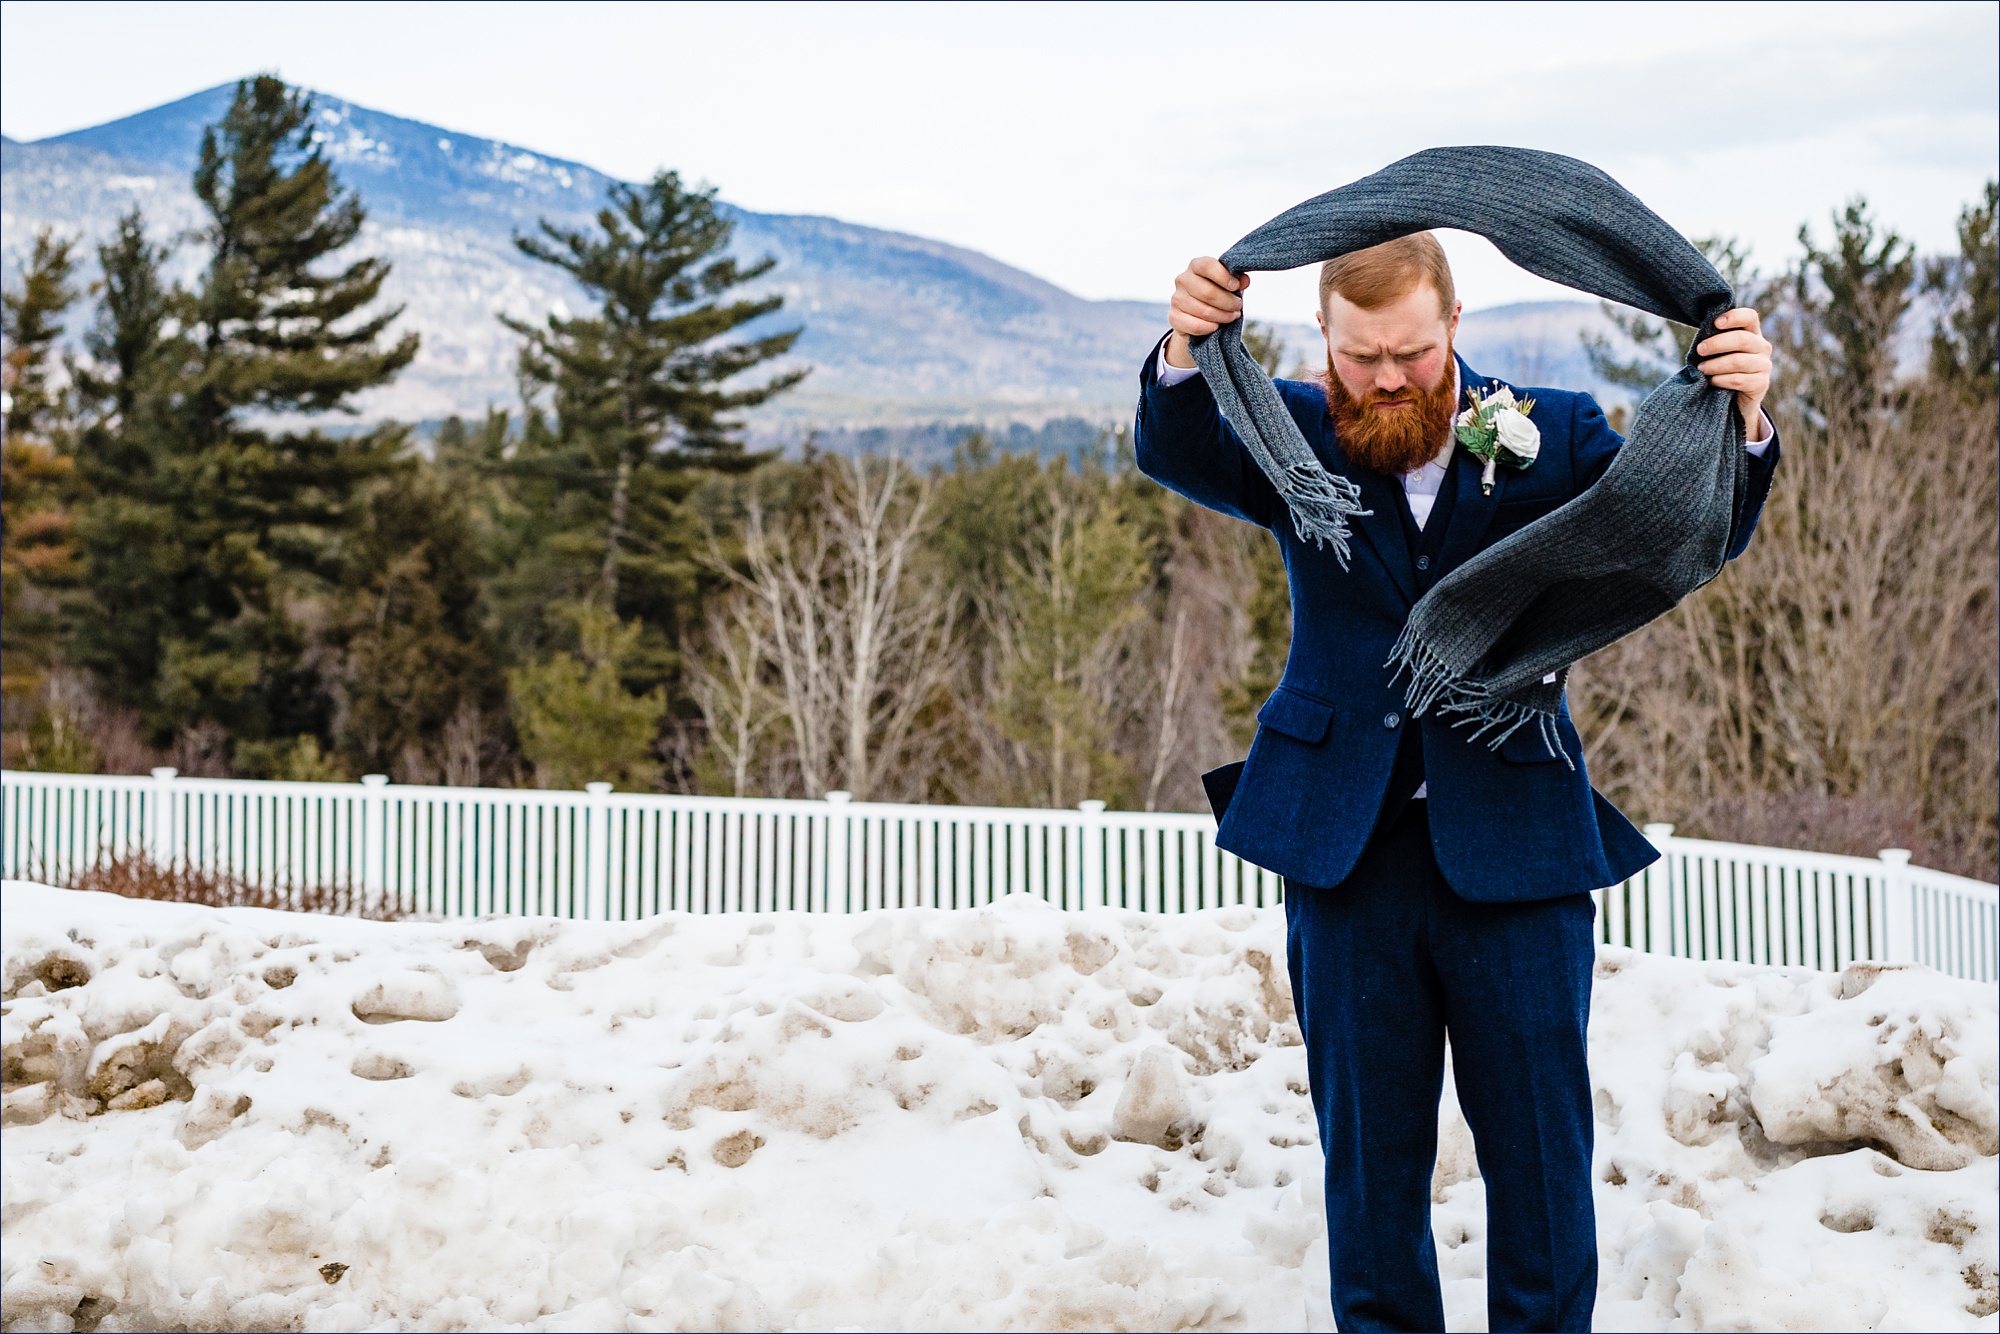 The groom fixes his tie in front of the White Mountains on his wedding day